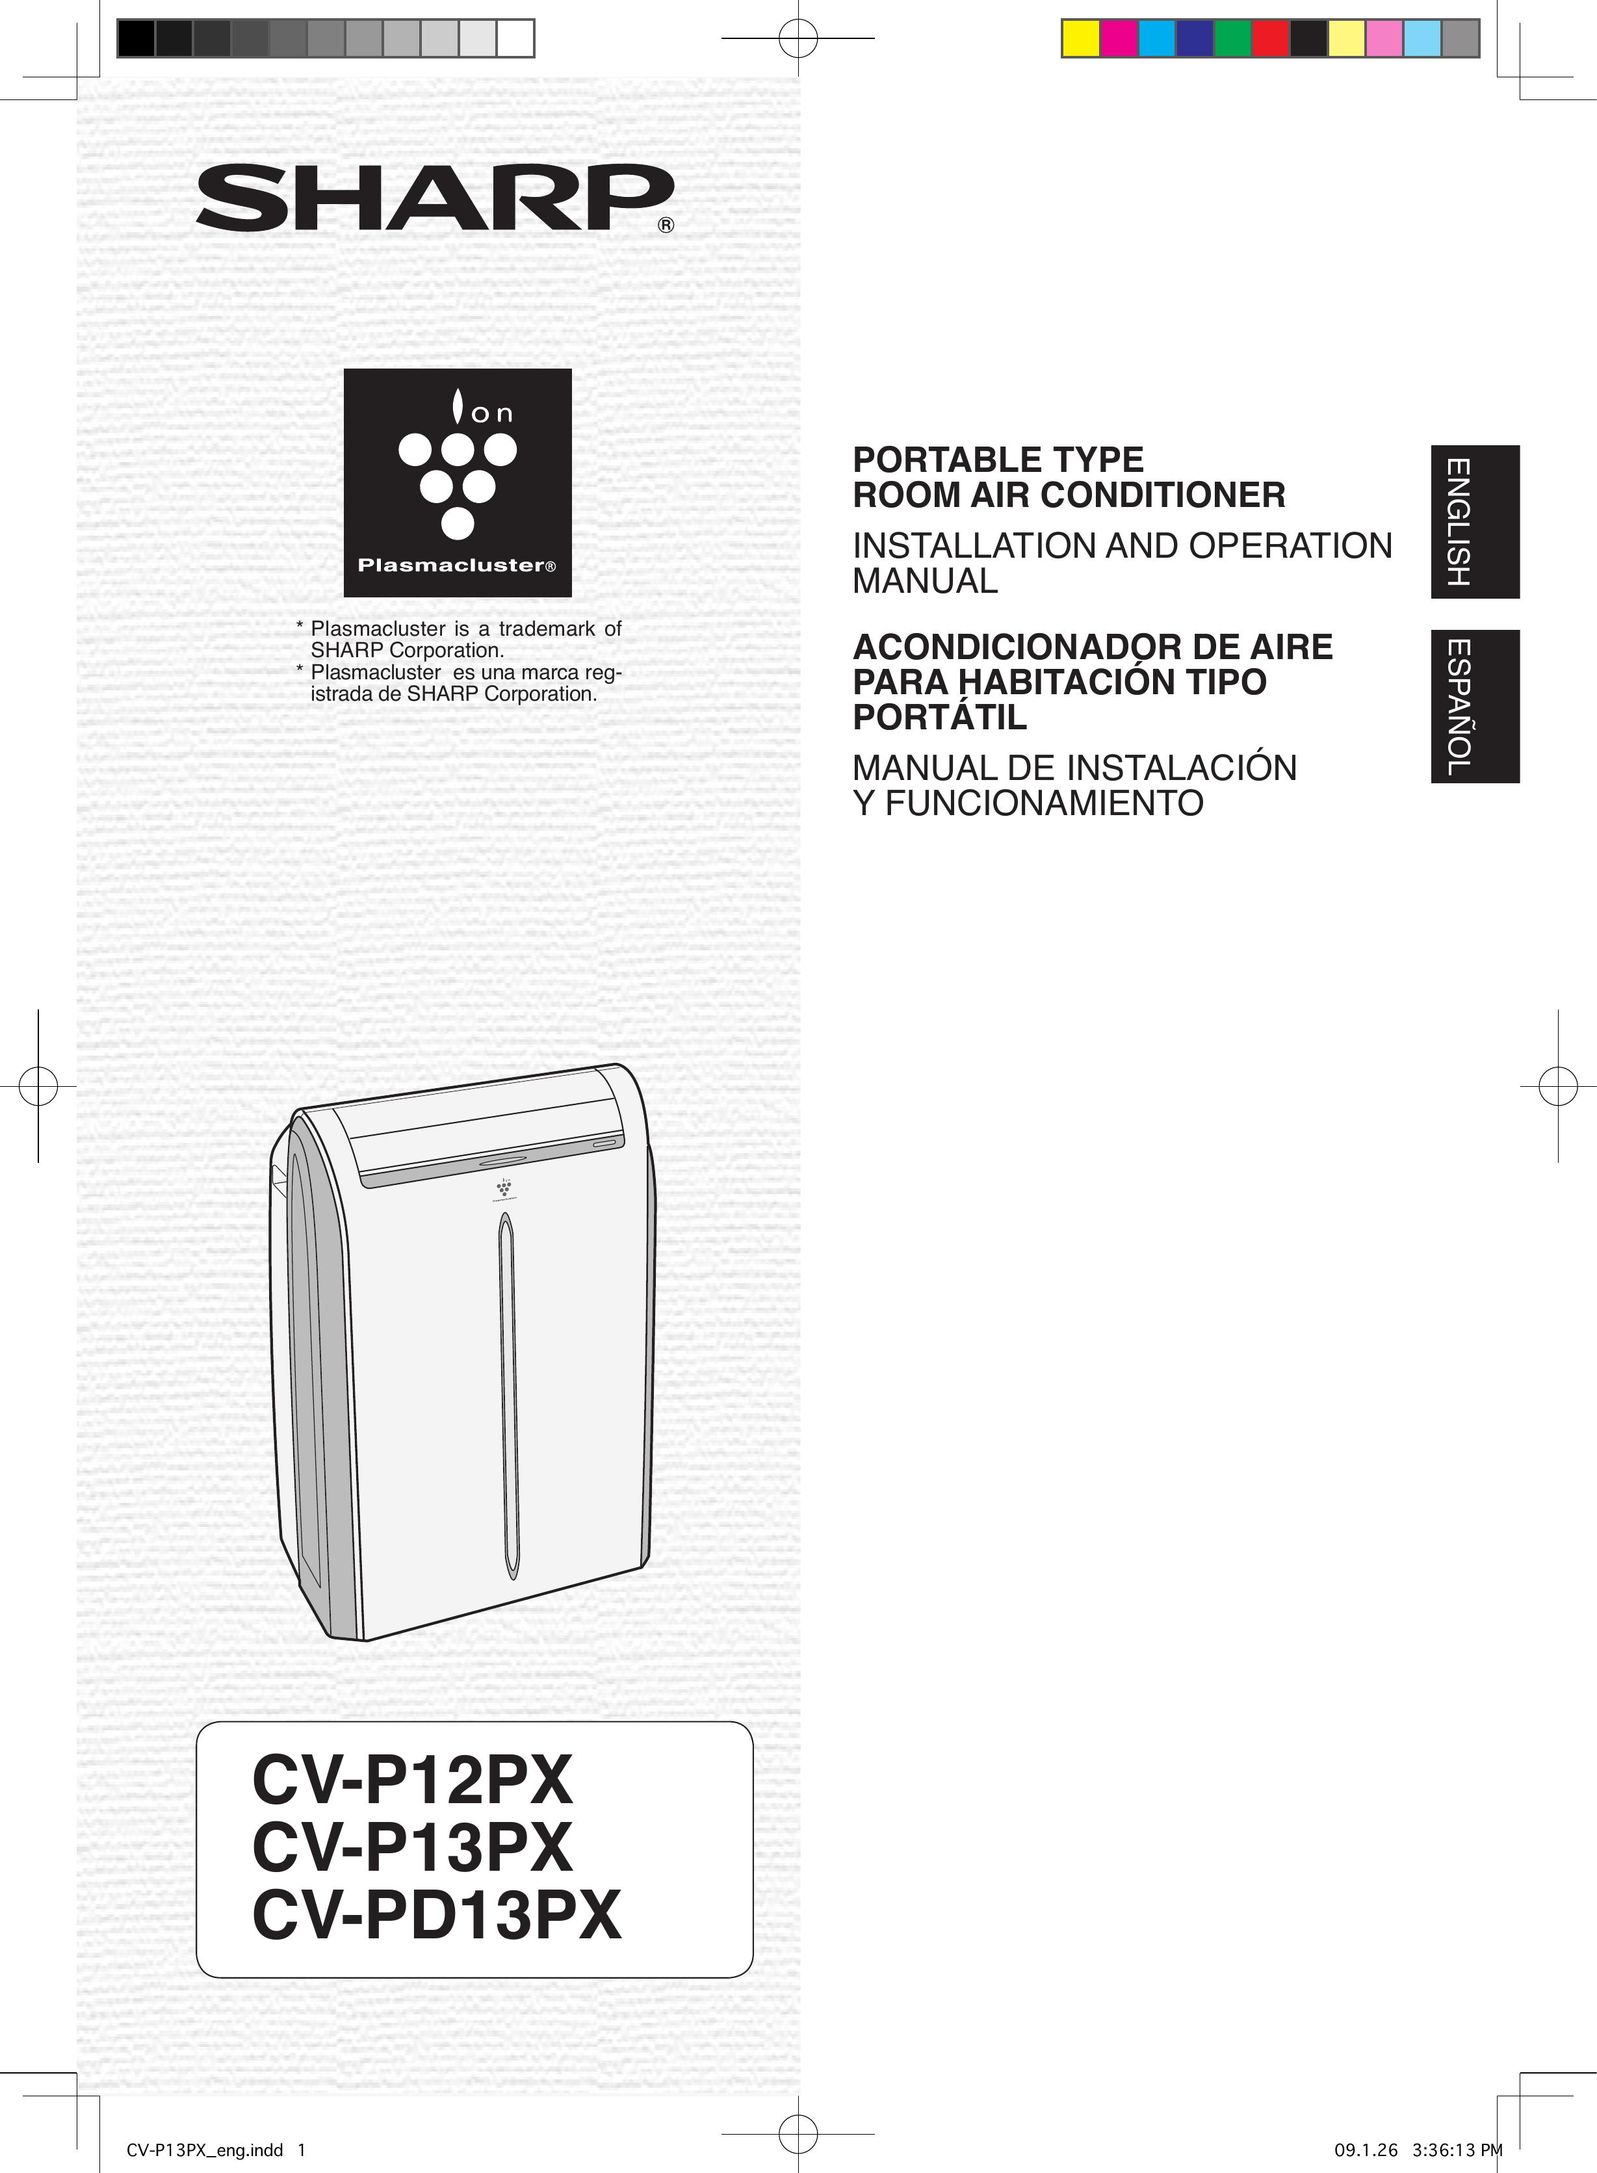 Sony CV-P12PX Air Conditioner User Manual